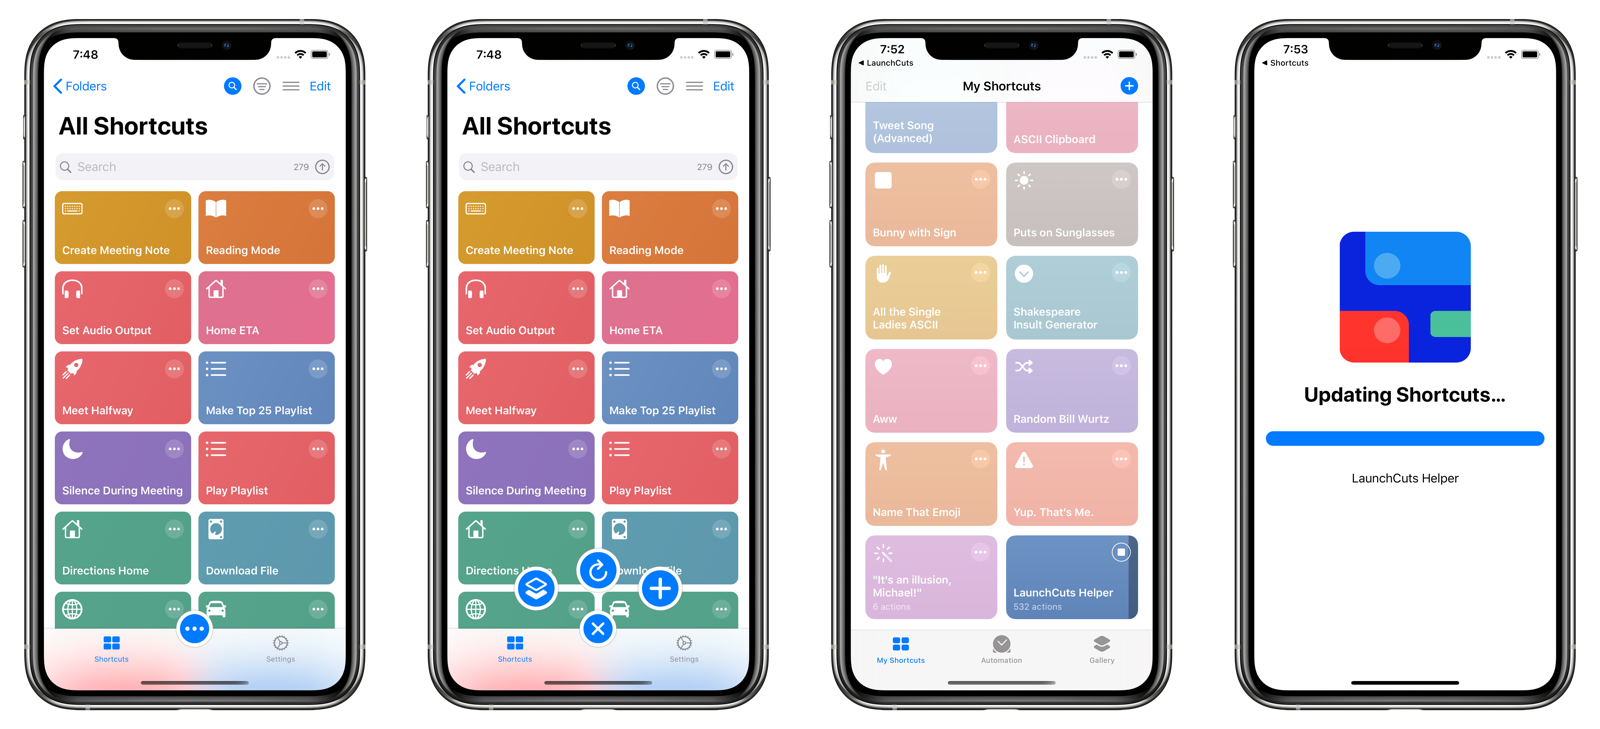 Updating Shortcuts in LaunchCuts 1.1